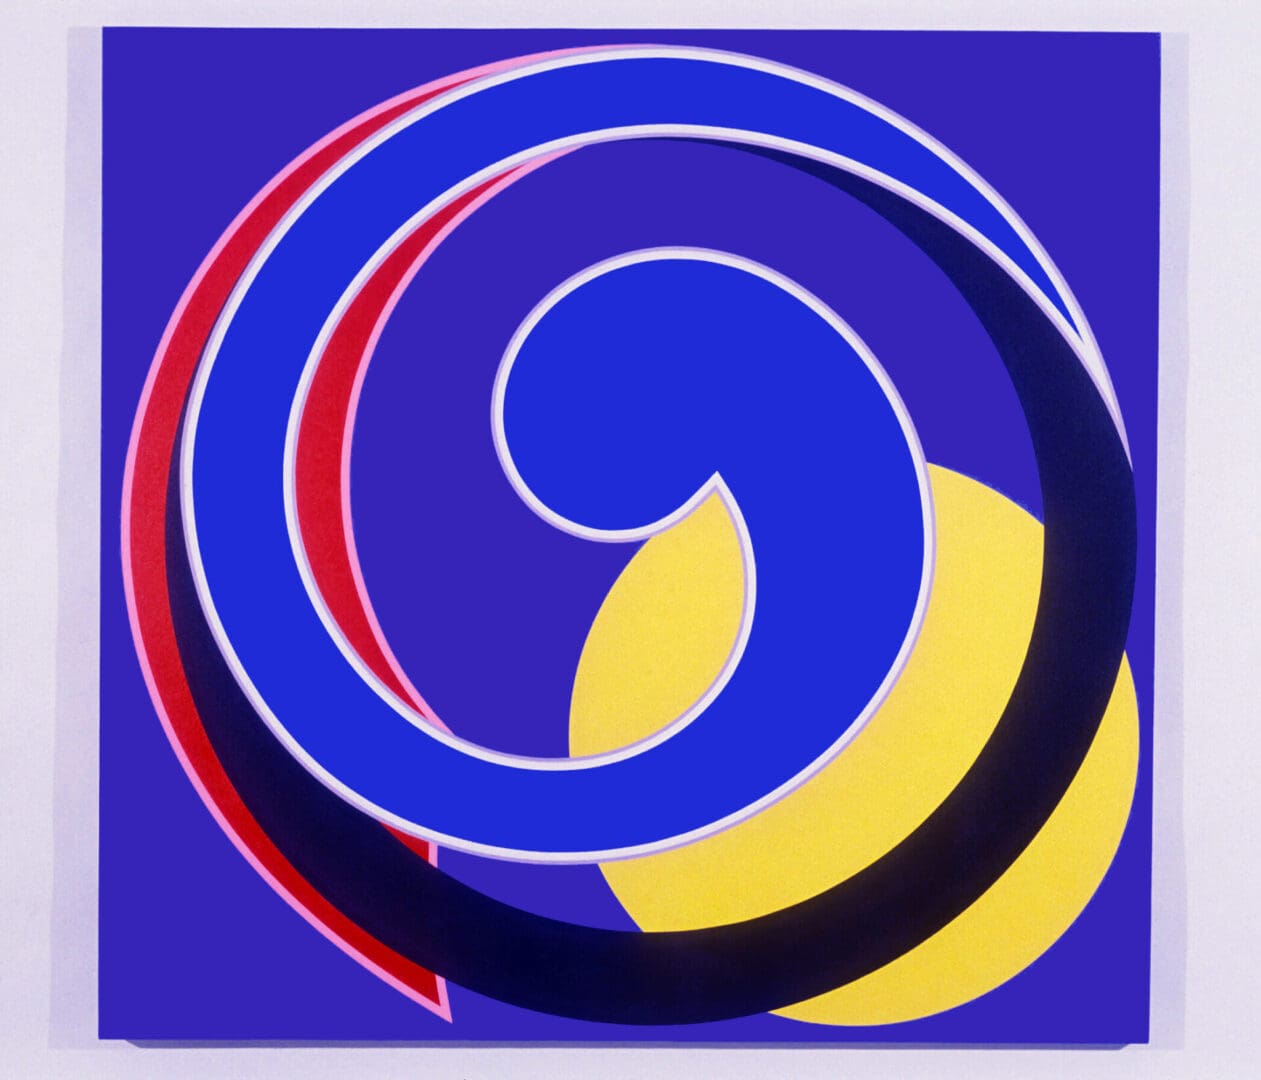 Clifford Singer. Etude In Resonance. 1990. Acrylic on Canvas. 63 x 66 inches